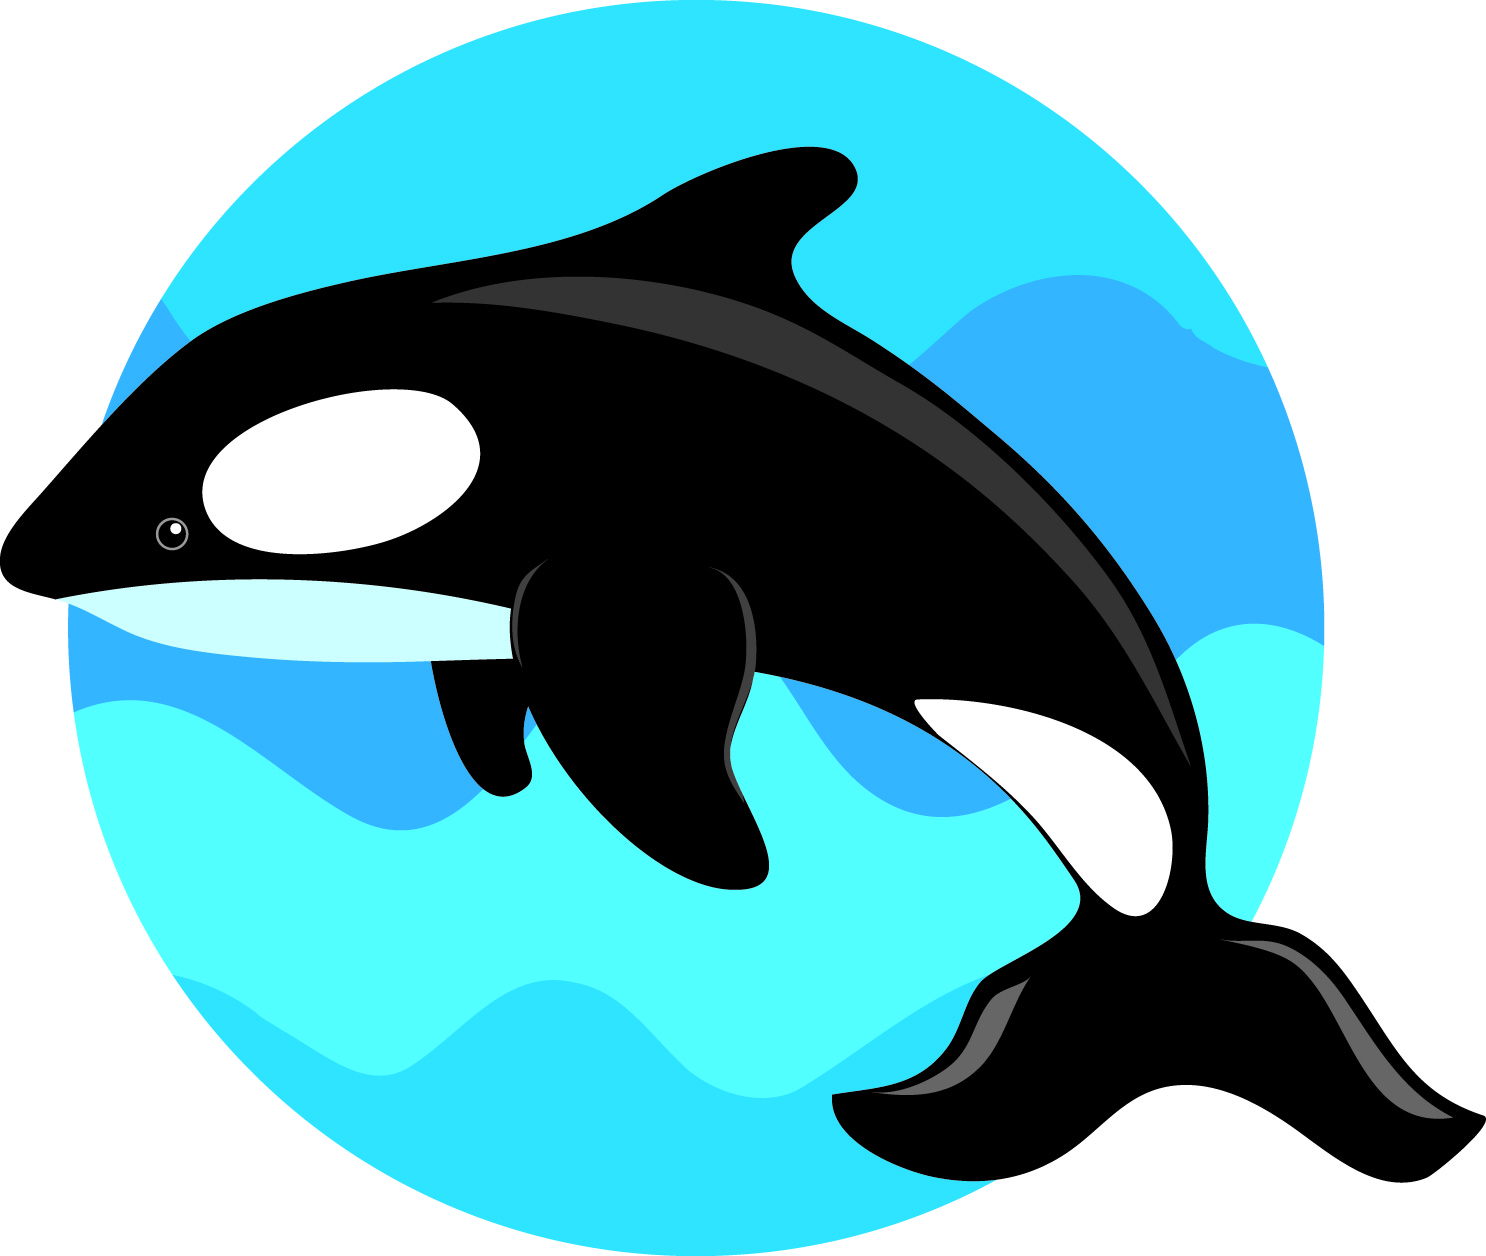 Jumping the whale vector Free Vector / 4Vector